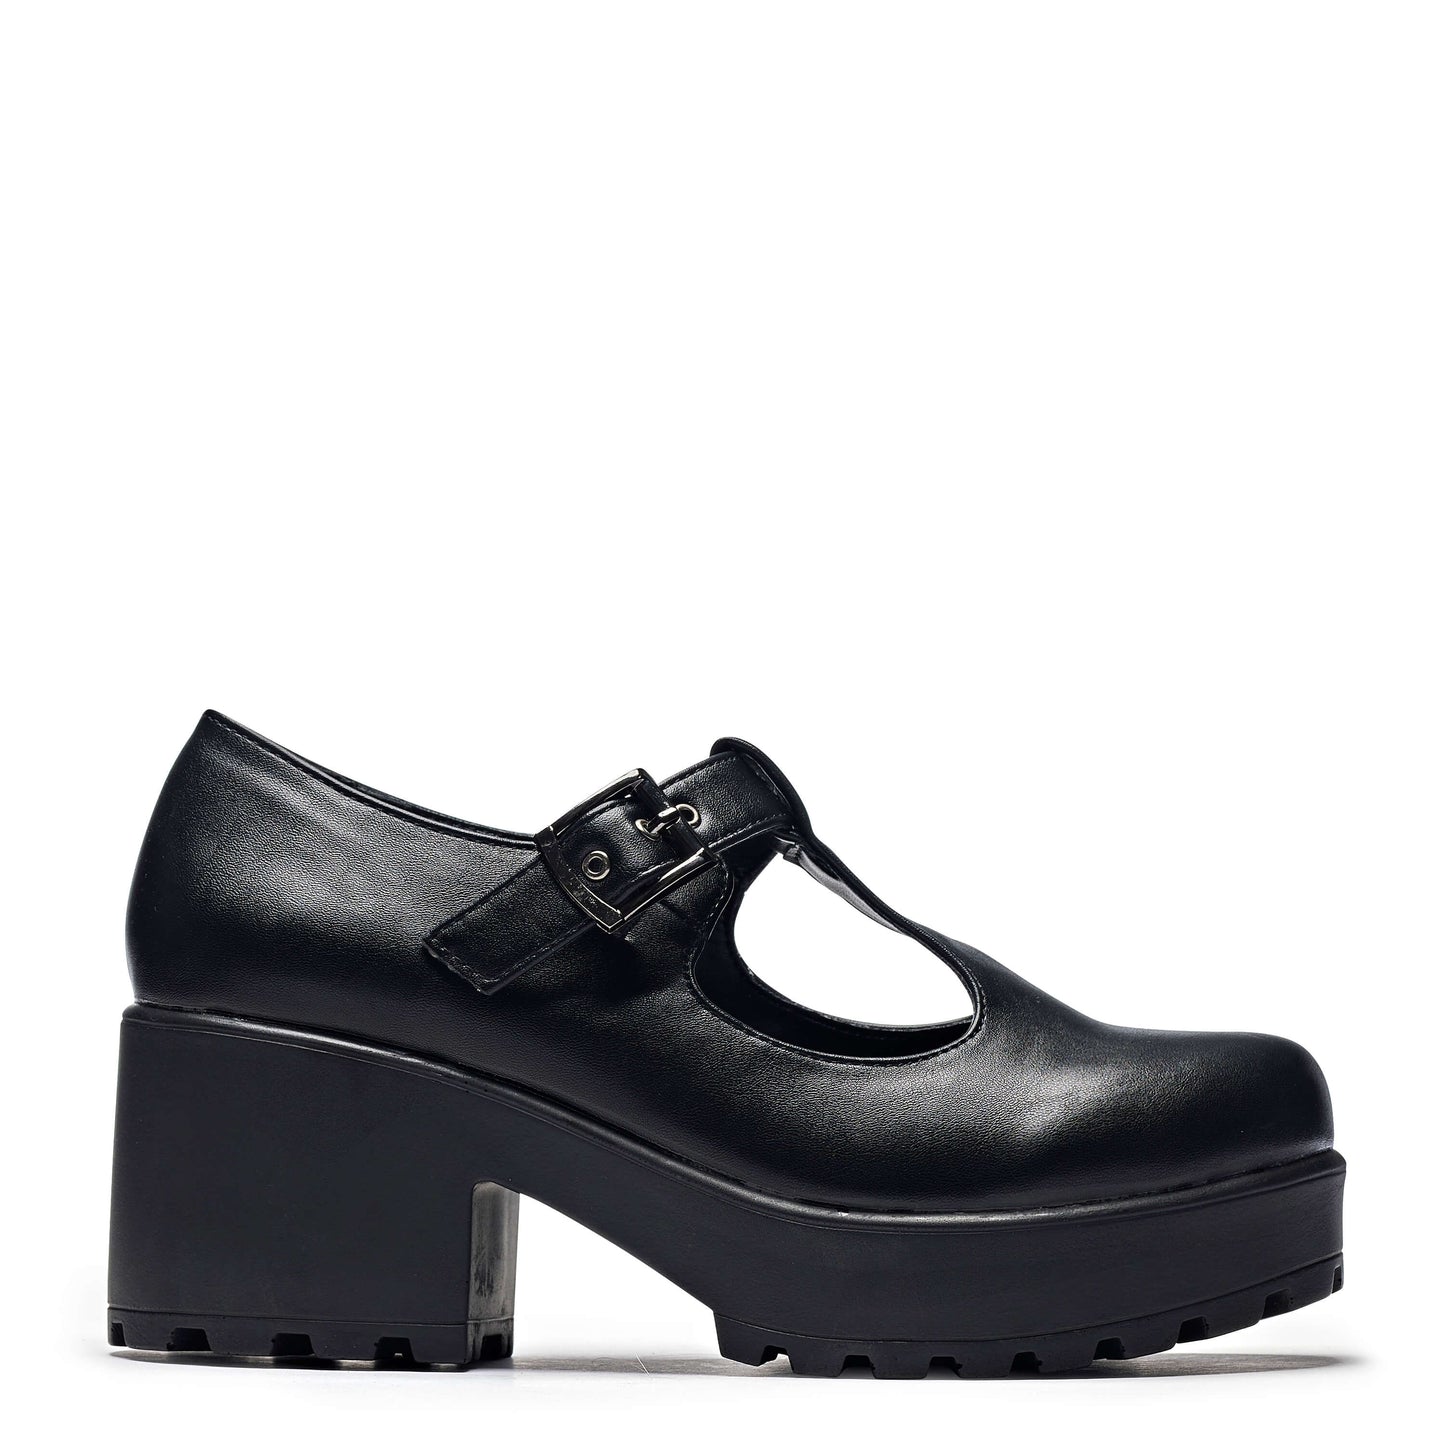 SAI Black Mary Jane Shoes 'Faux Leather Edition' - Mary Janes - KOI Footwear - Black - Main View